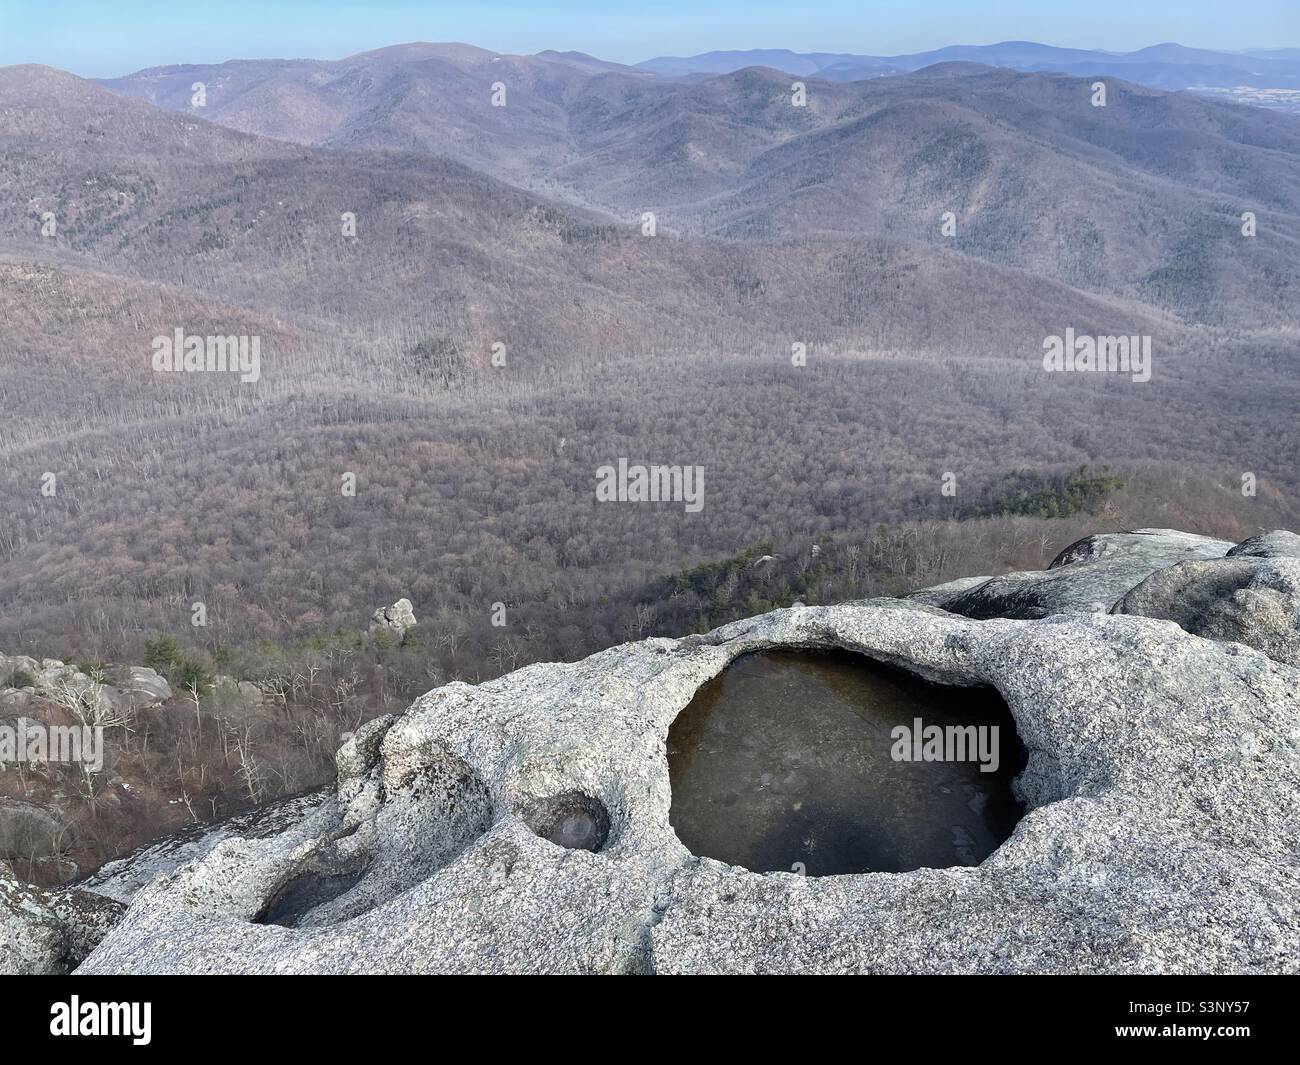 The summit of Old Rag in Shenandoah National Park. Stock Photo